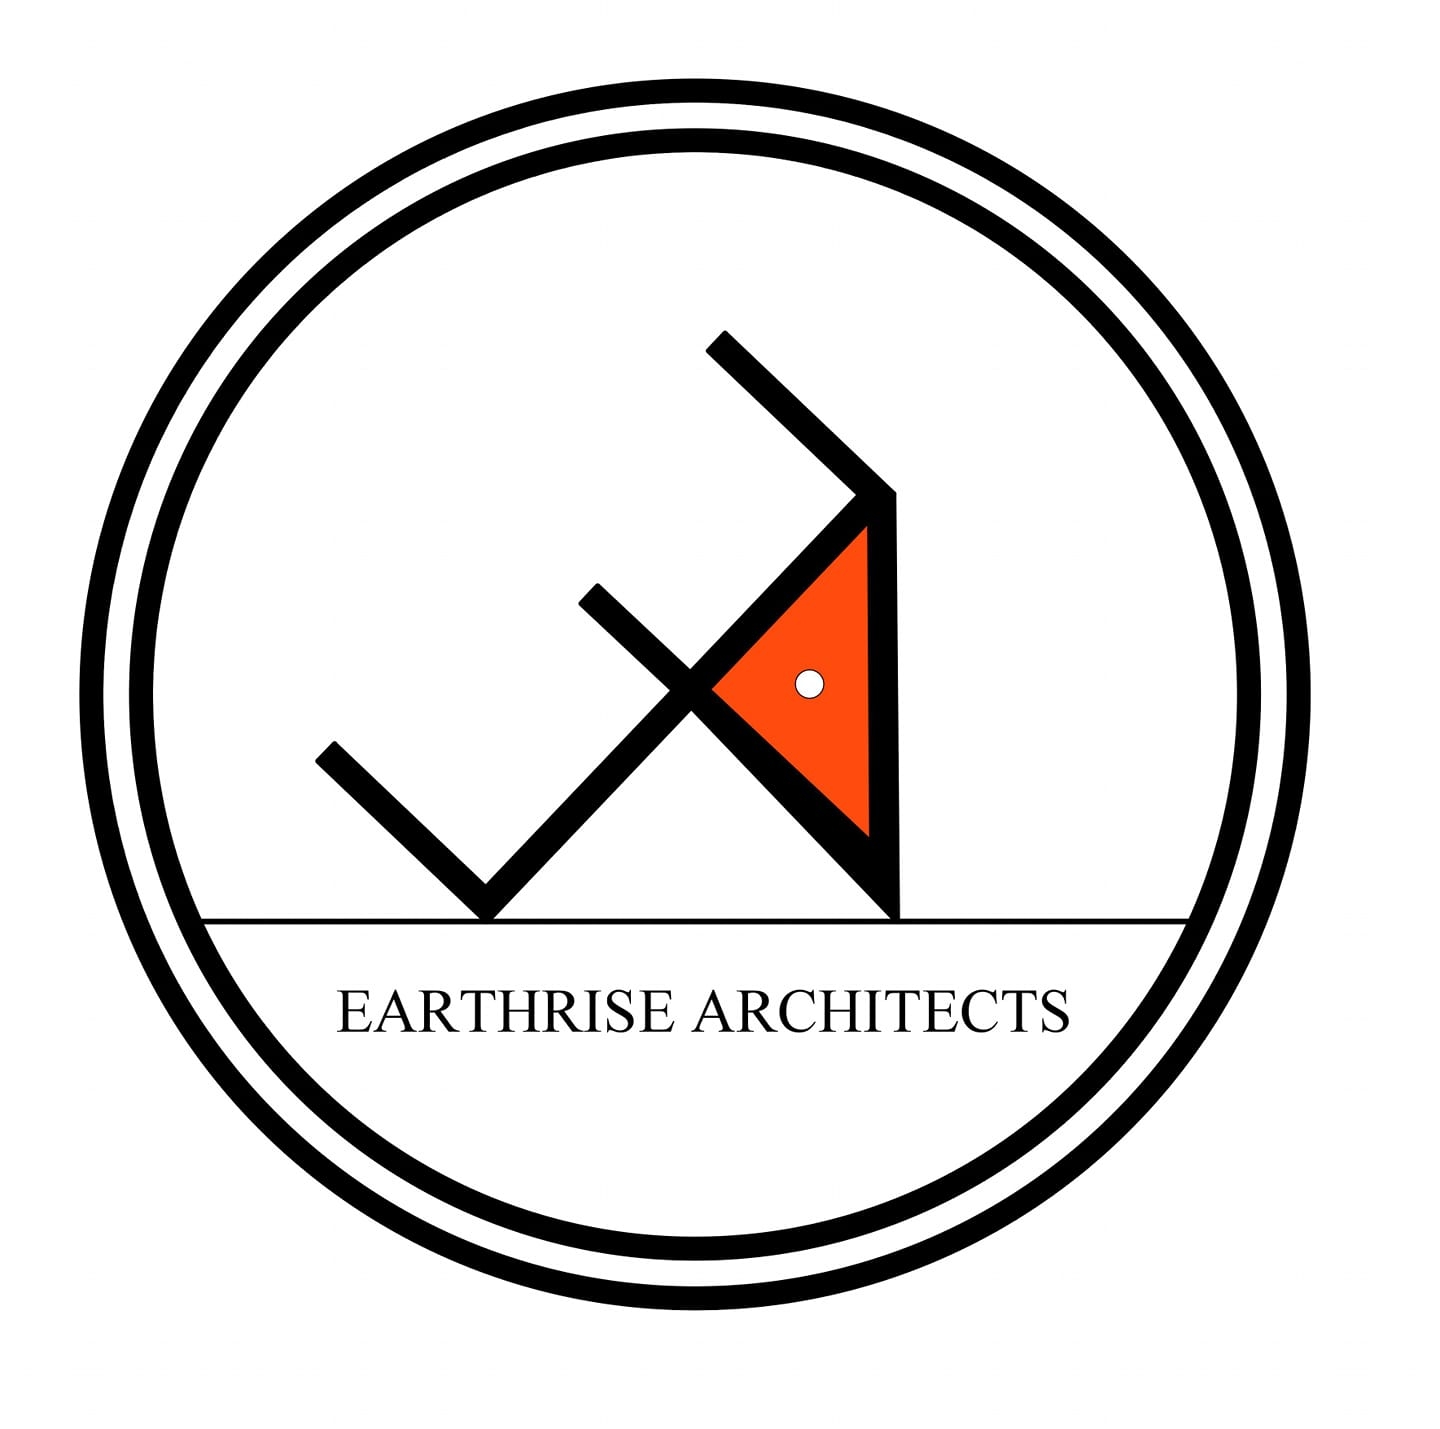 Earthrise Architects|Architect|Professional Services